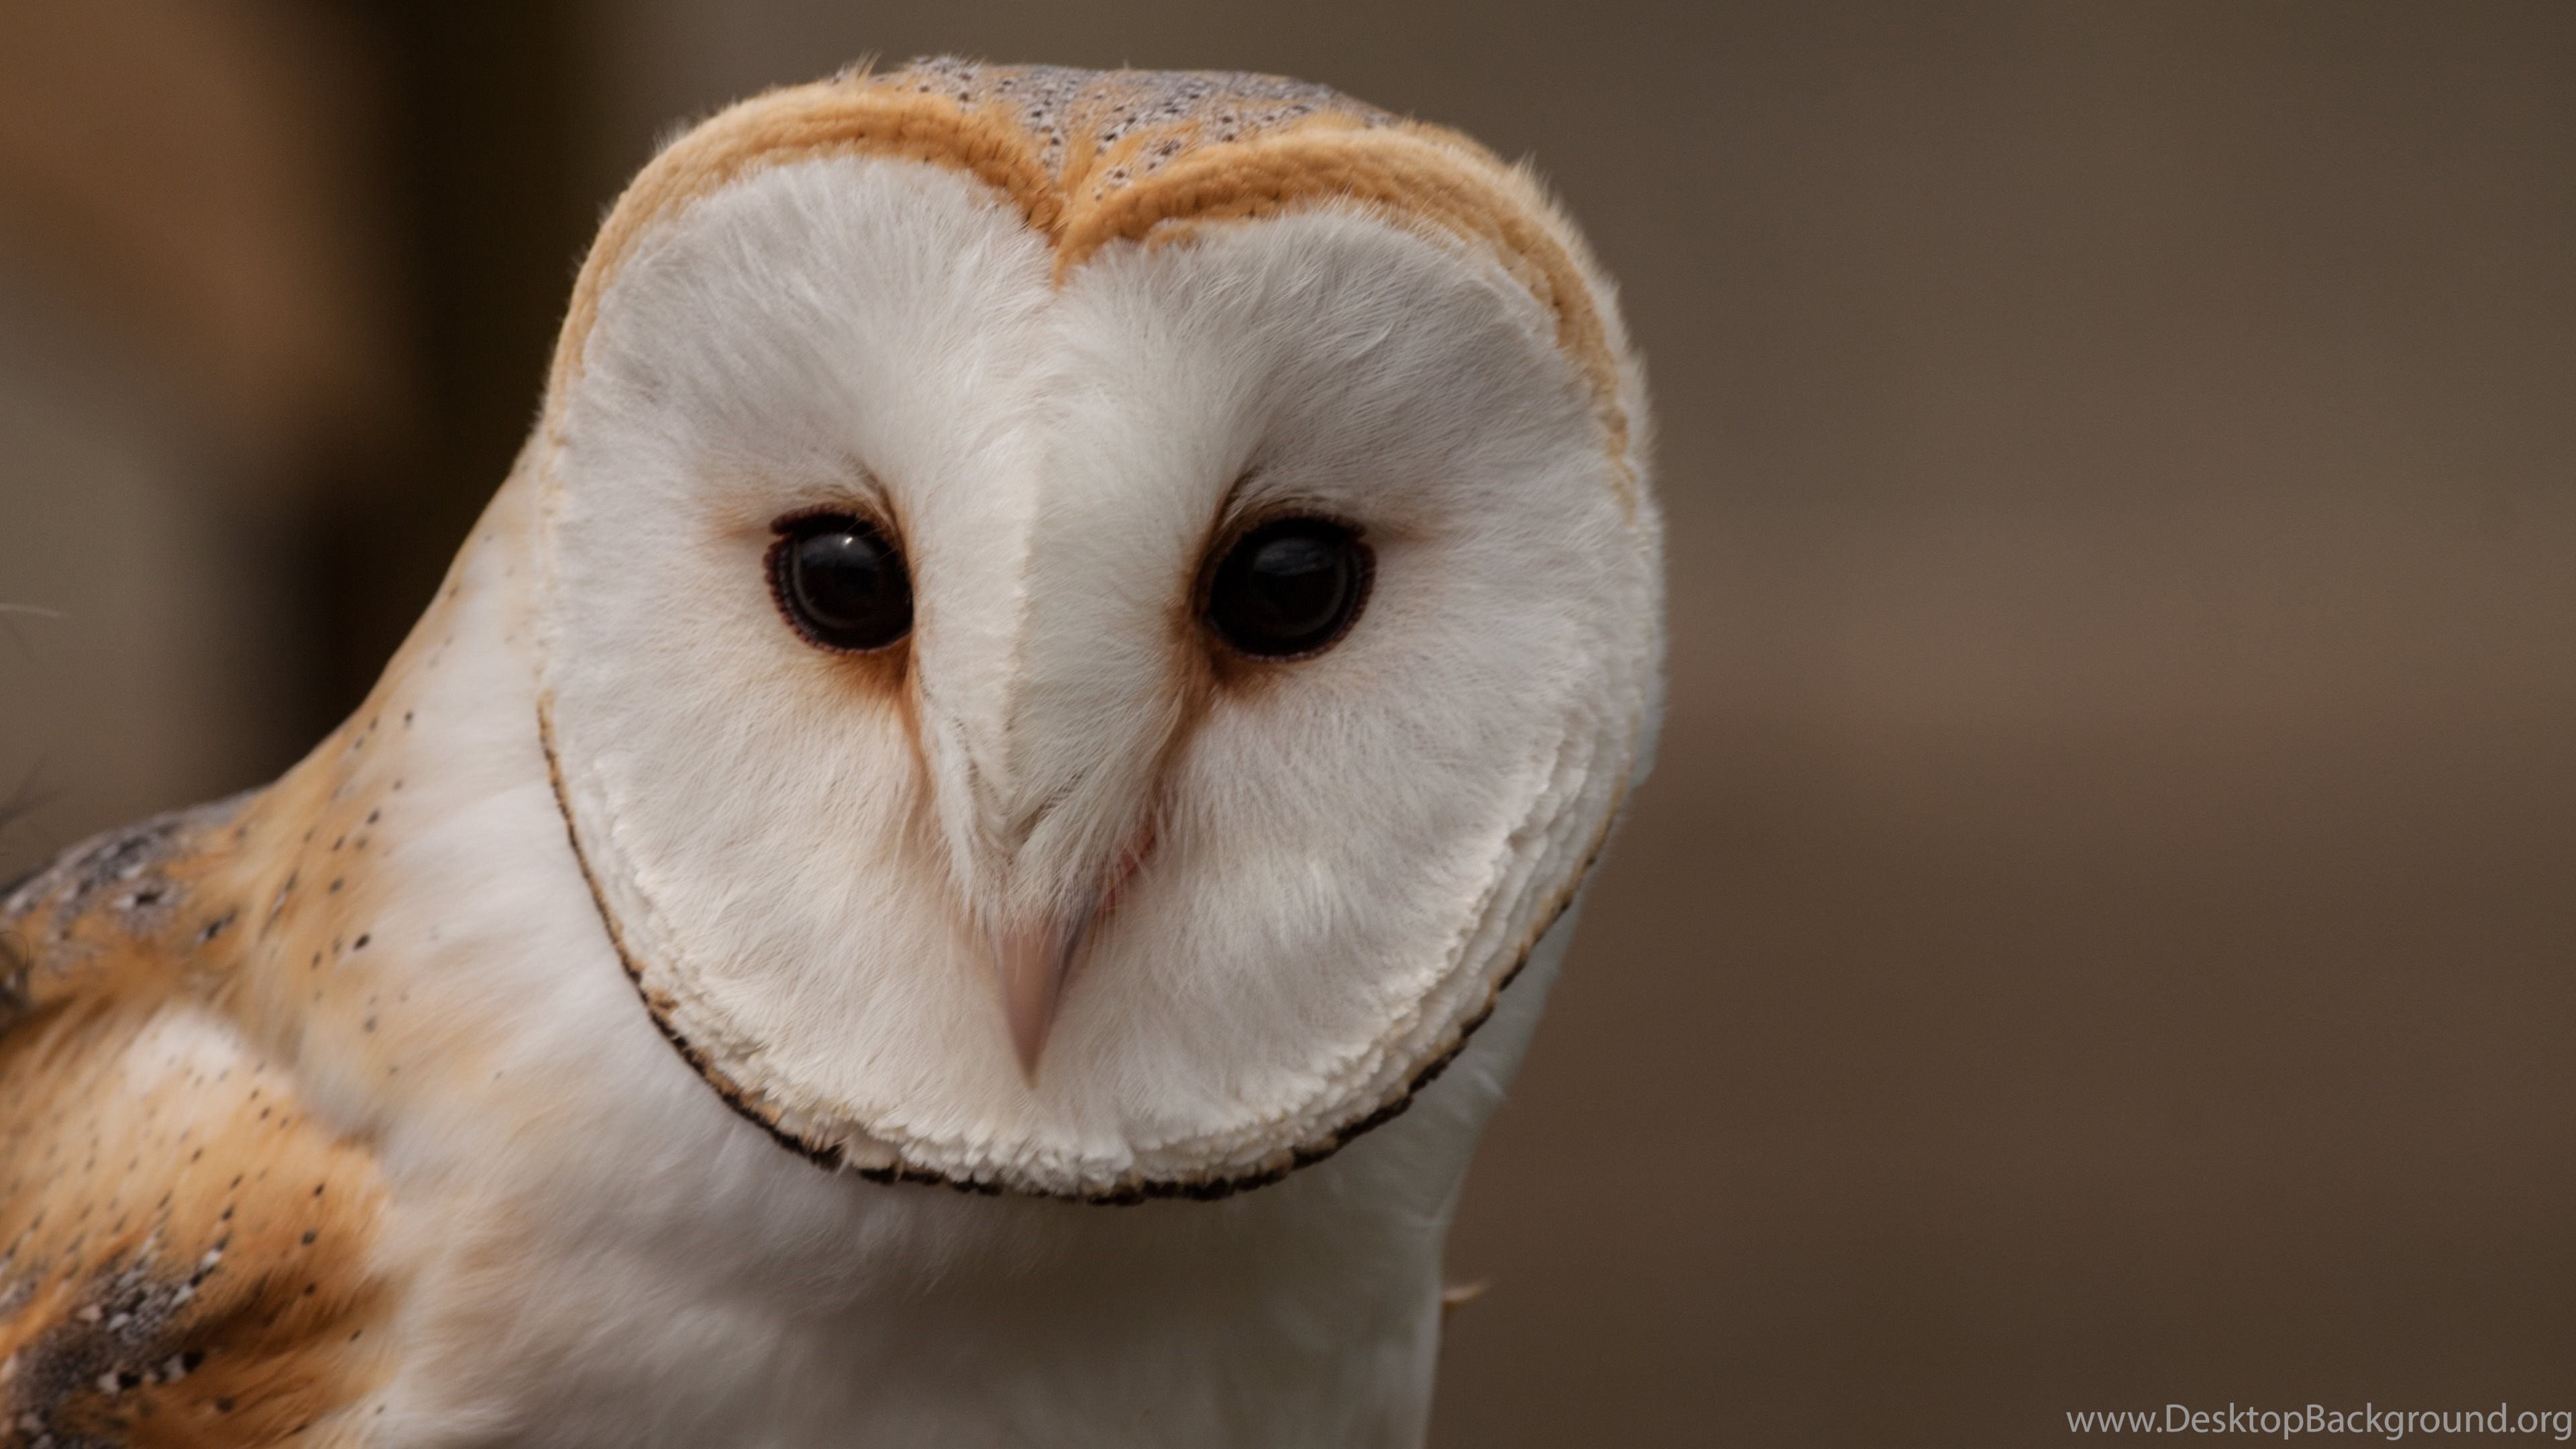 Barn Owl Uhd Wallpapers Ultra High Definition Wallpapers 4k